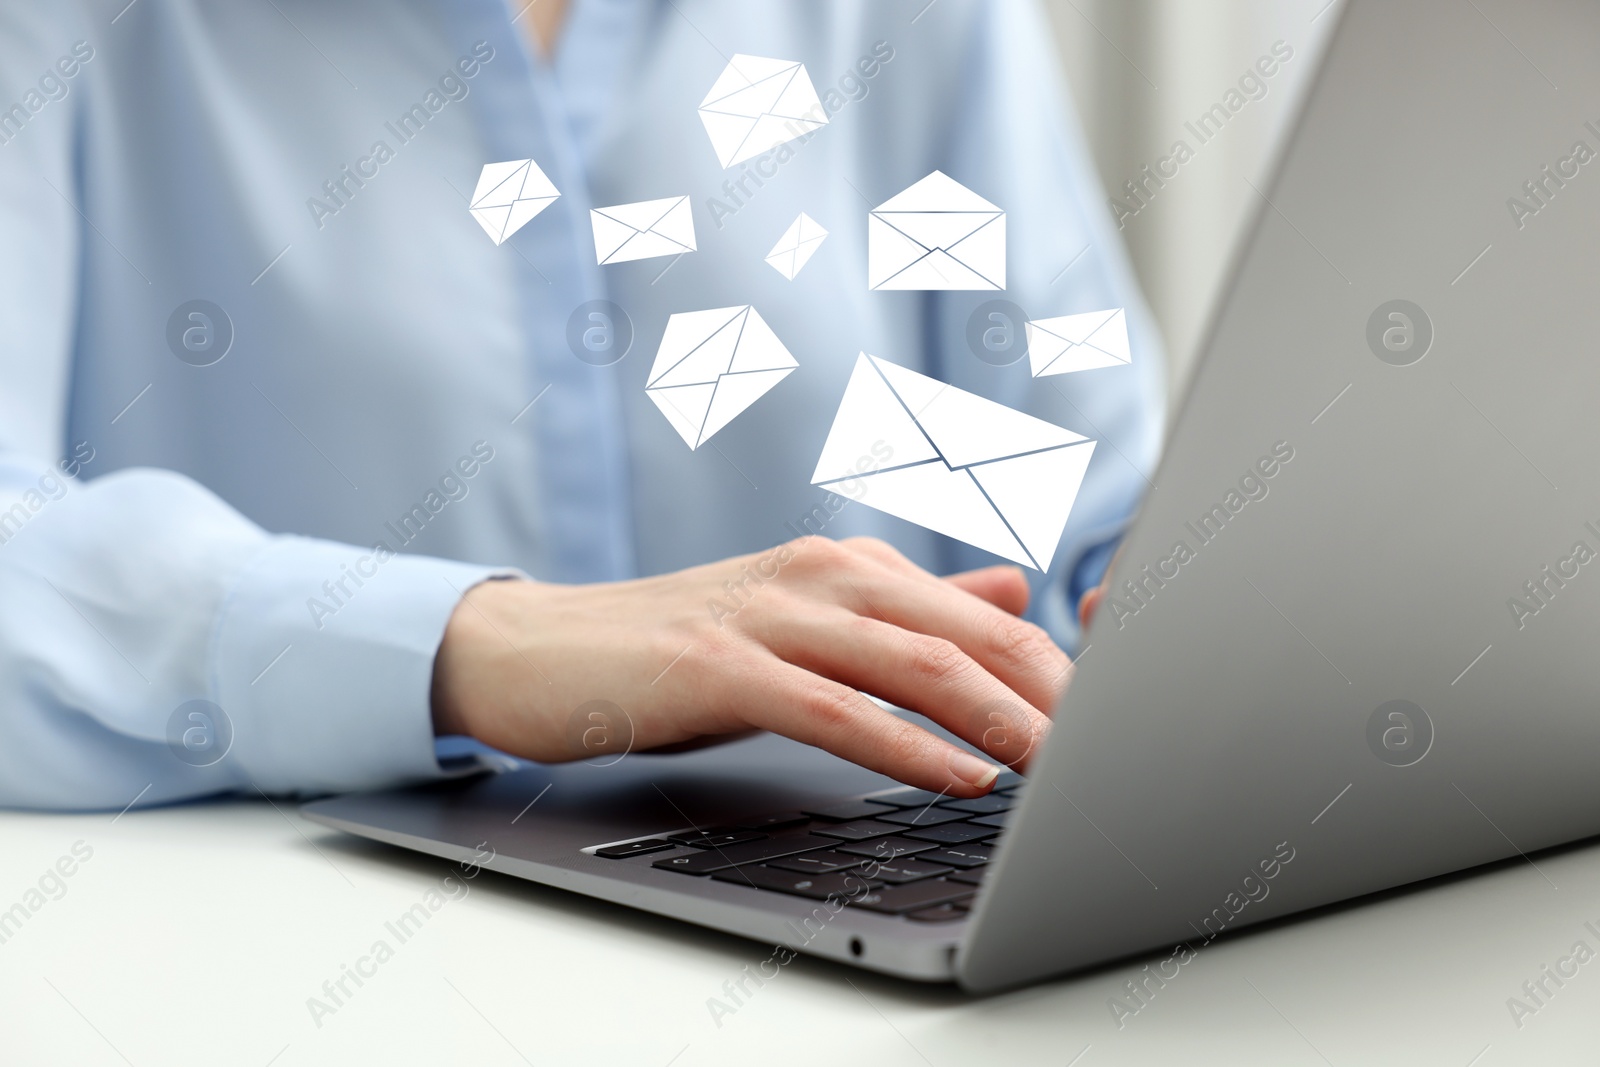 Image of Email. Woman using laptop at table, closeup. Letter illustrations over device